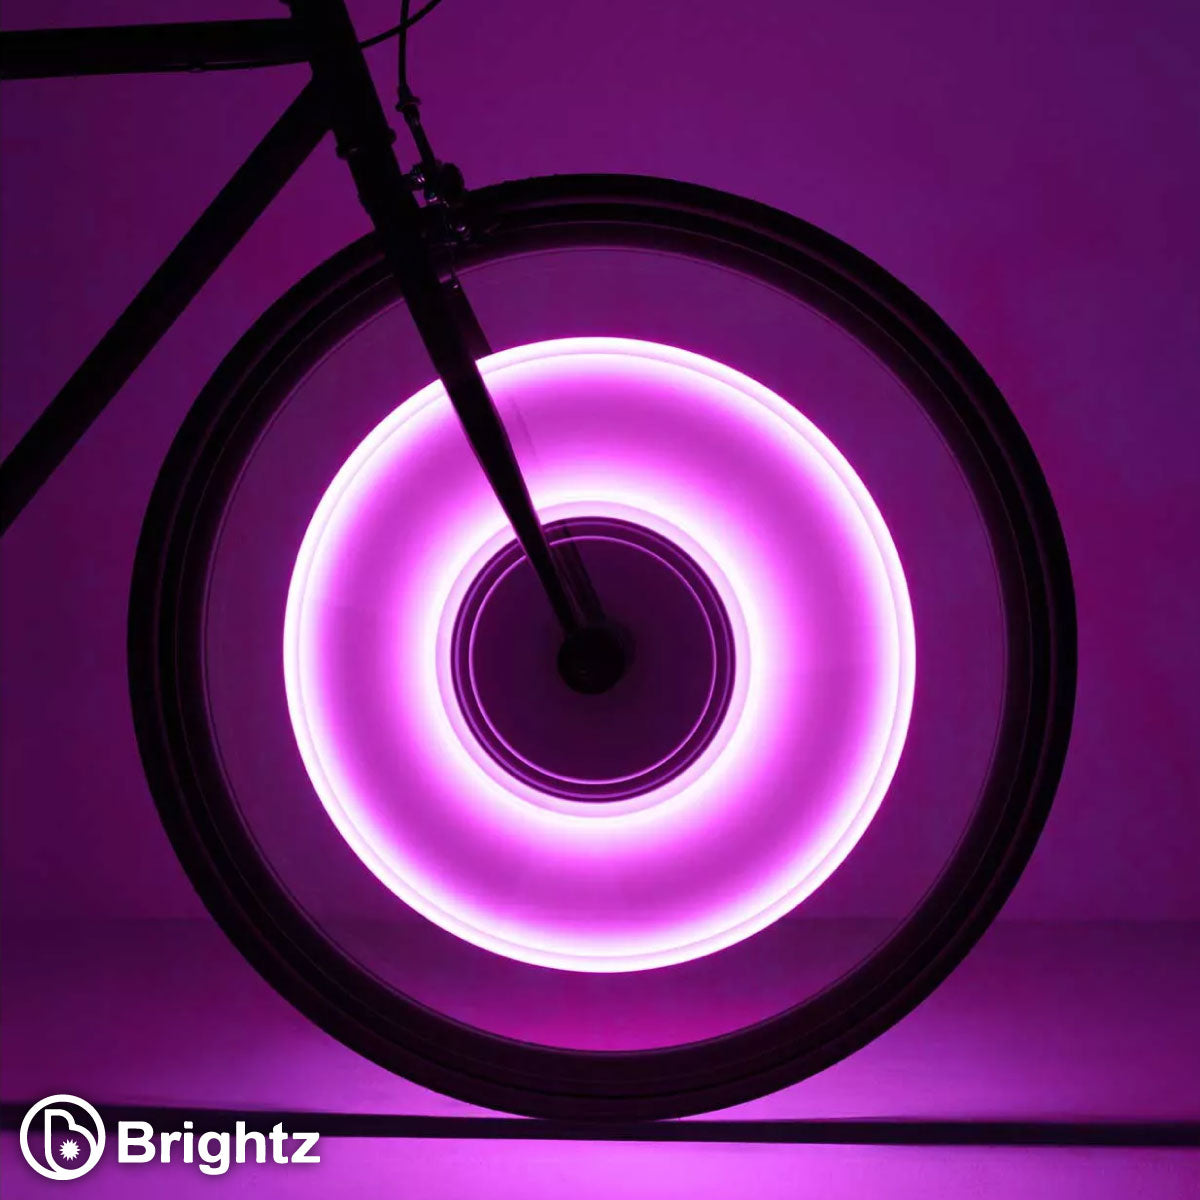 Spin Brightz Solid Color Spoke Lights in motion